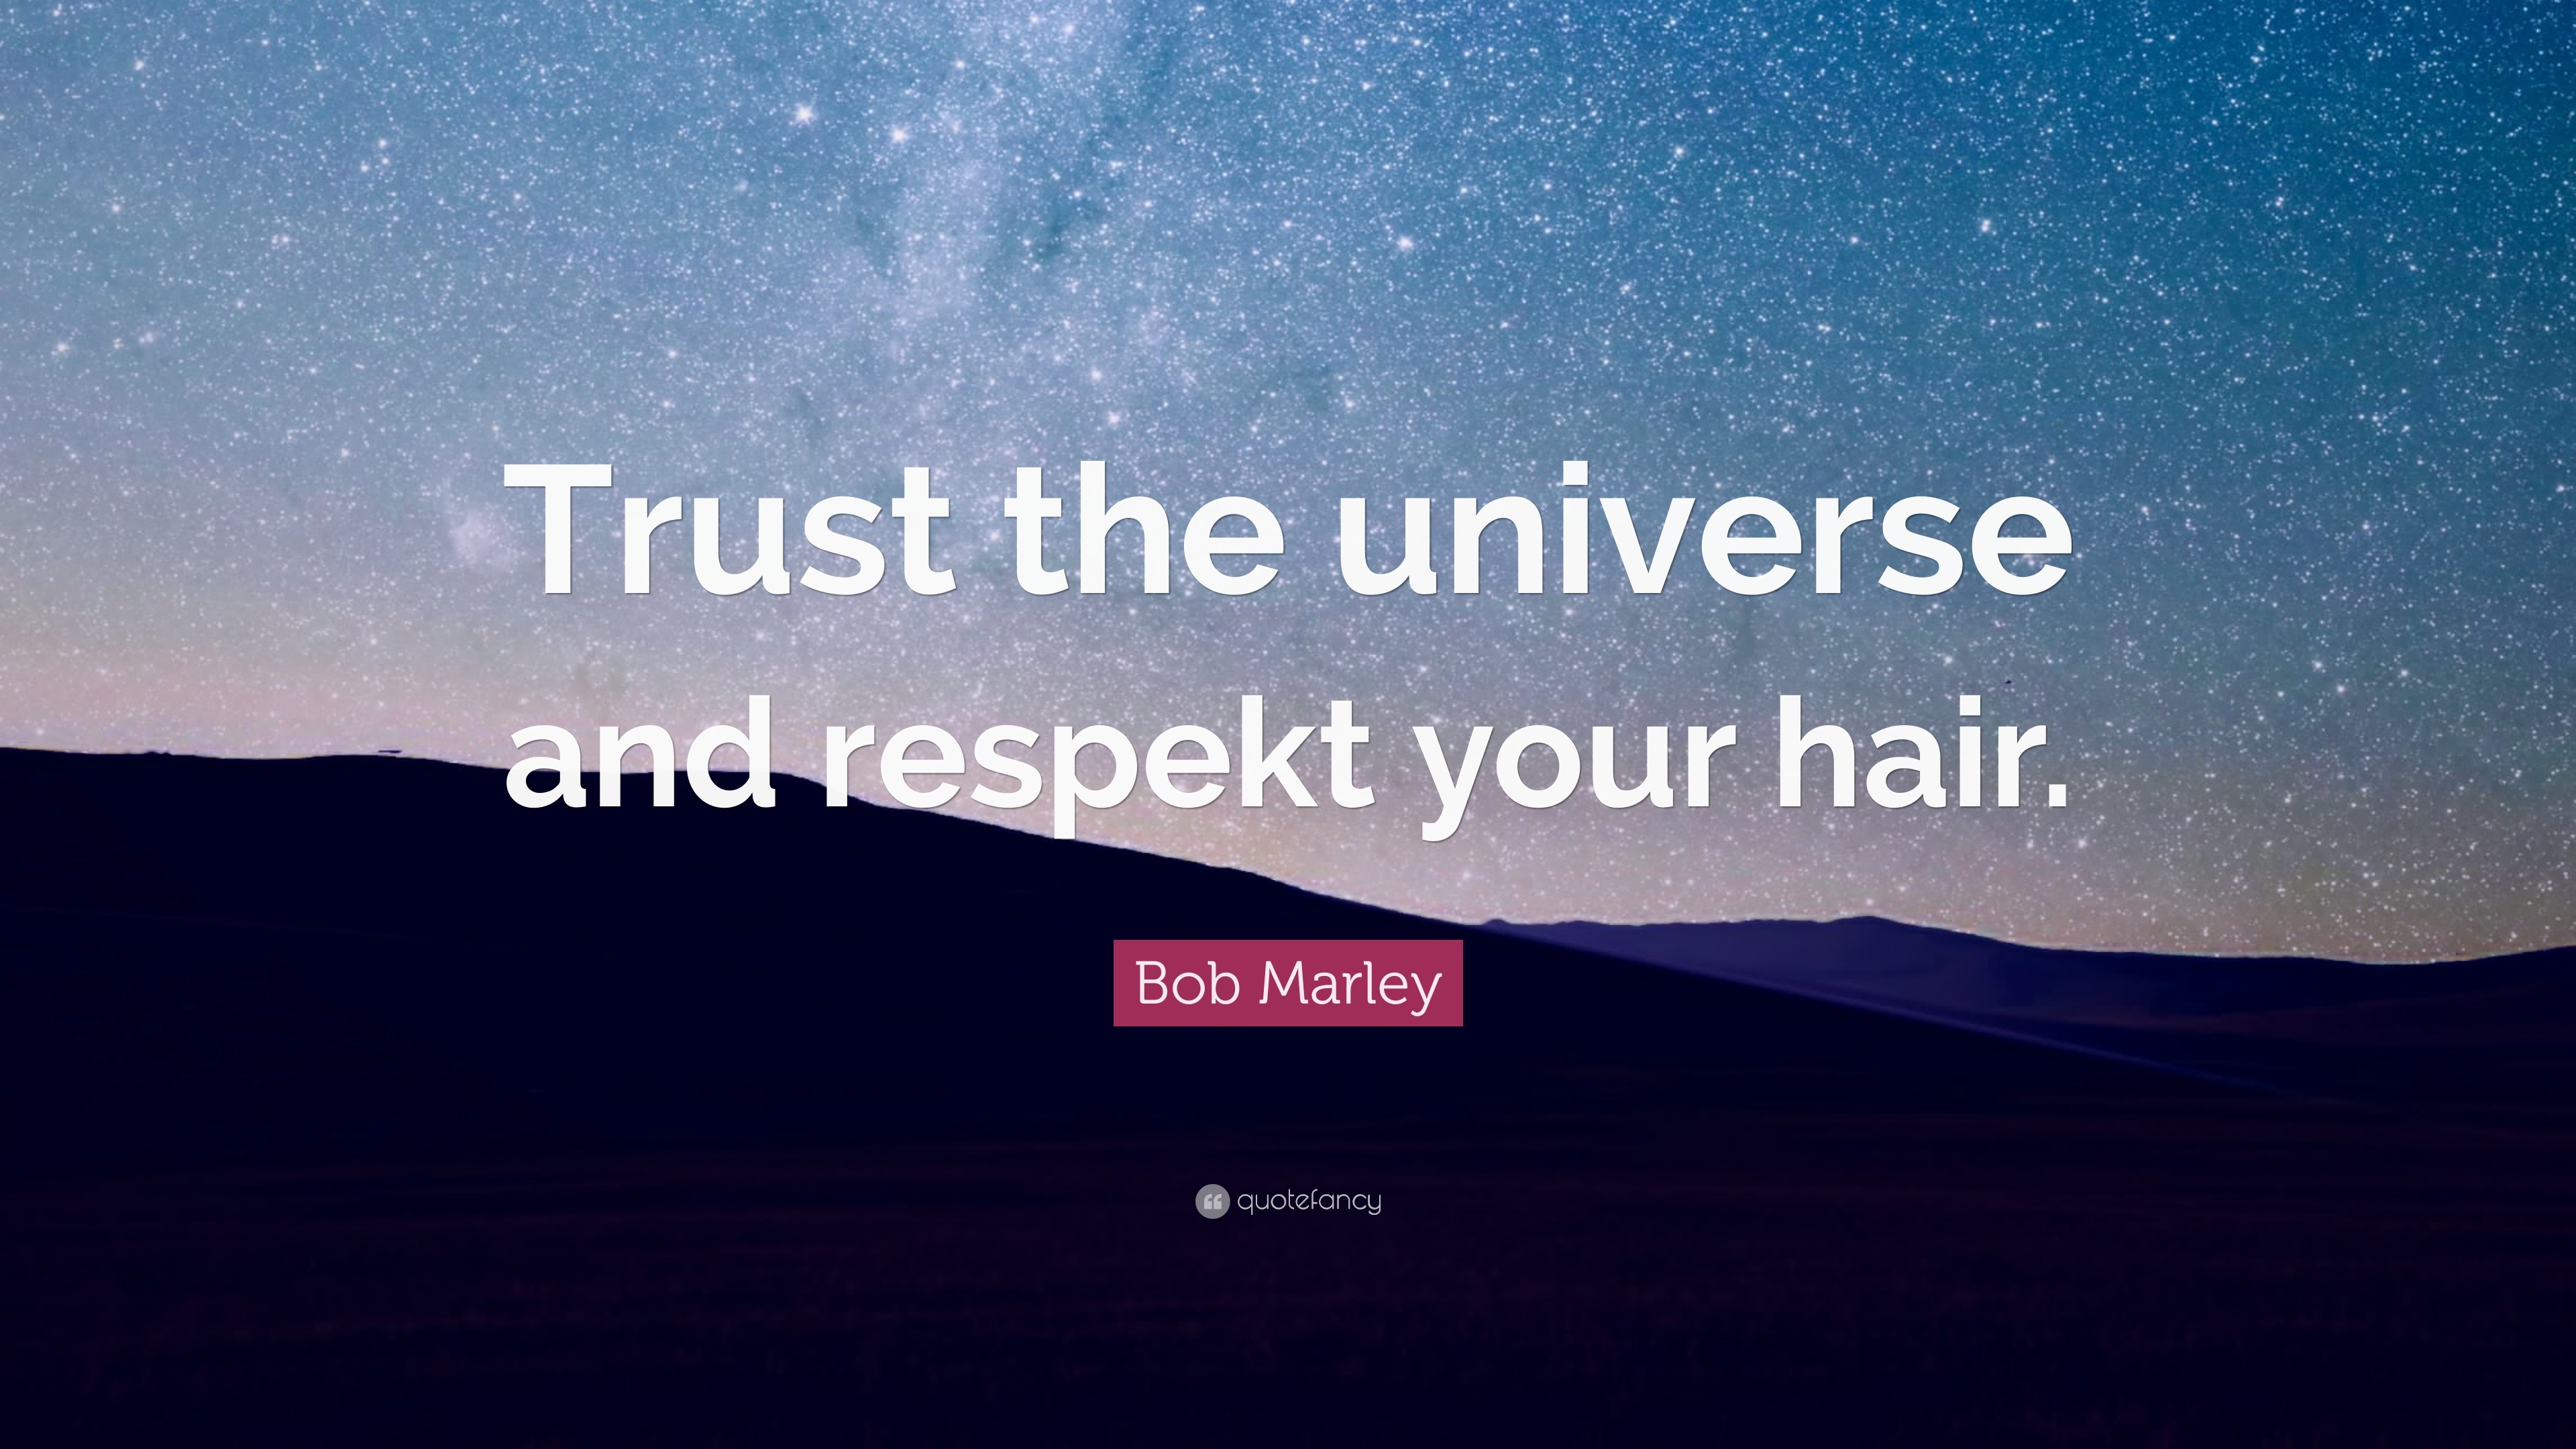 Bob Marley Quote: “Trust the universe and respekt your hair.”